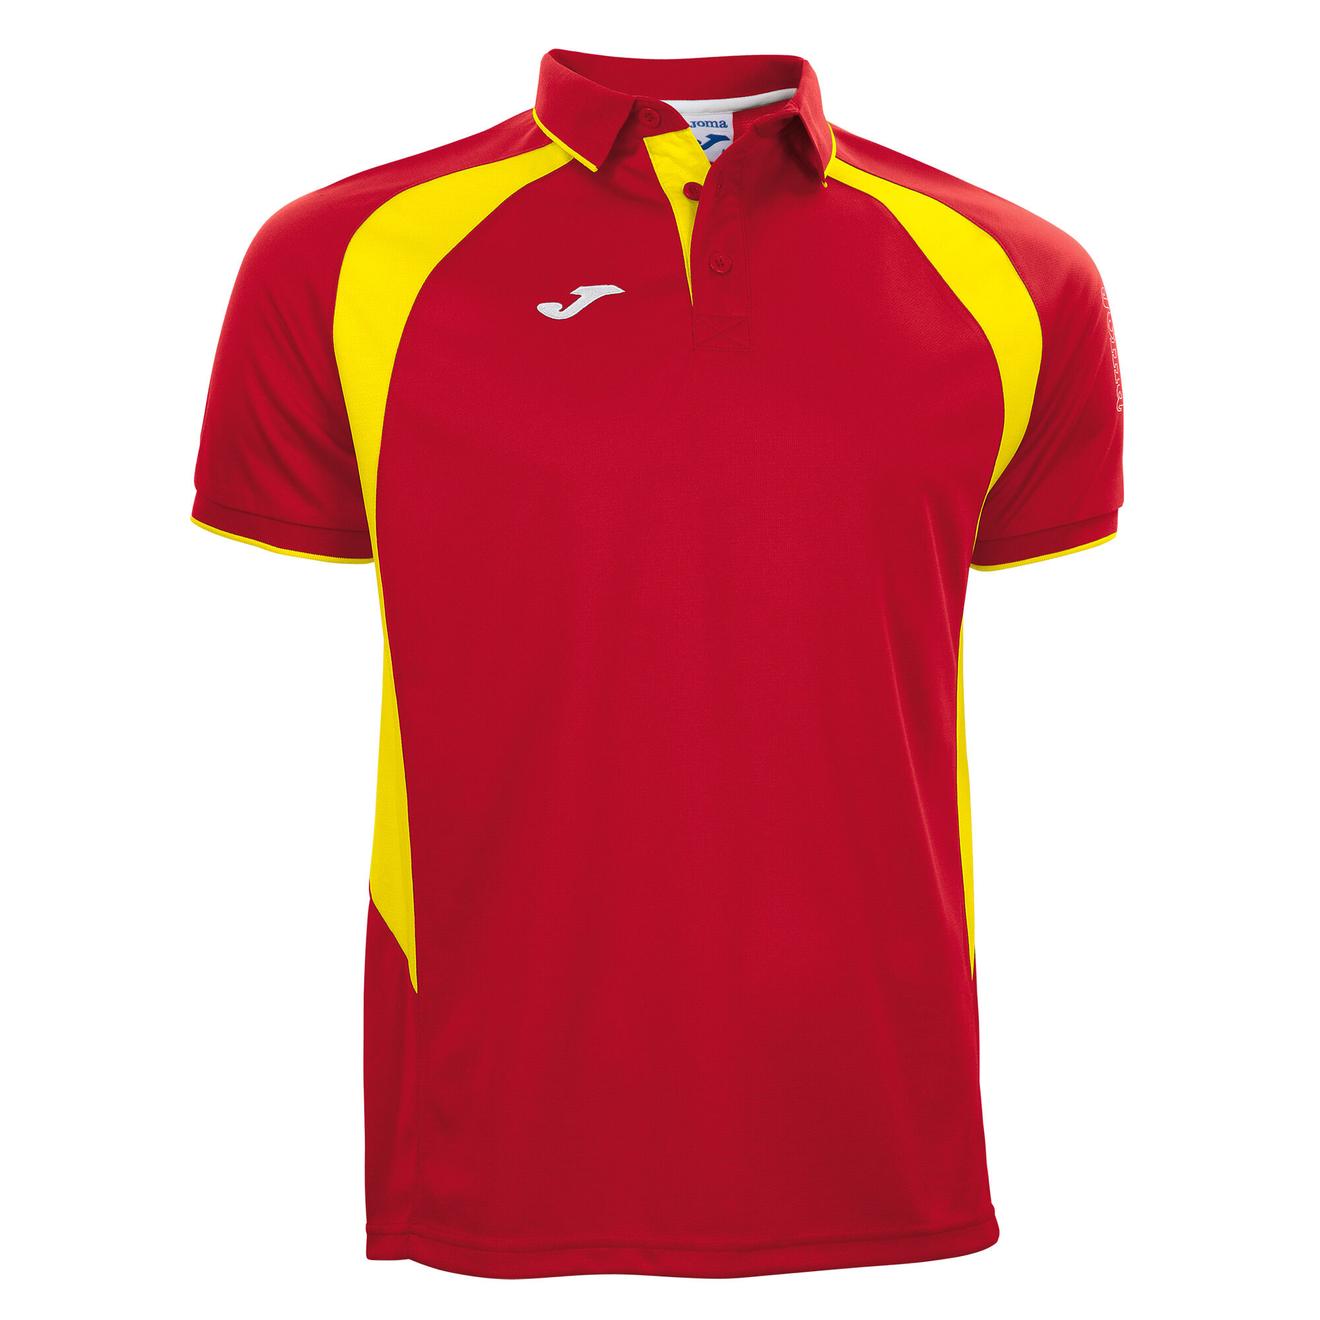 Polo shirt short-sleeve man Championship III red yellow offers at £10.5 in Joma